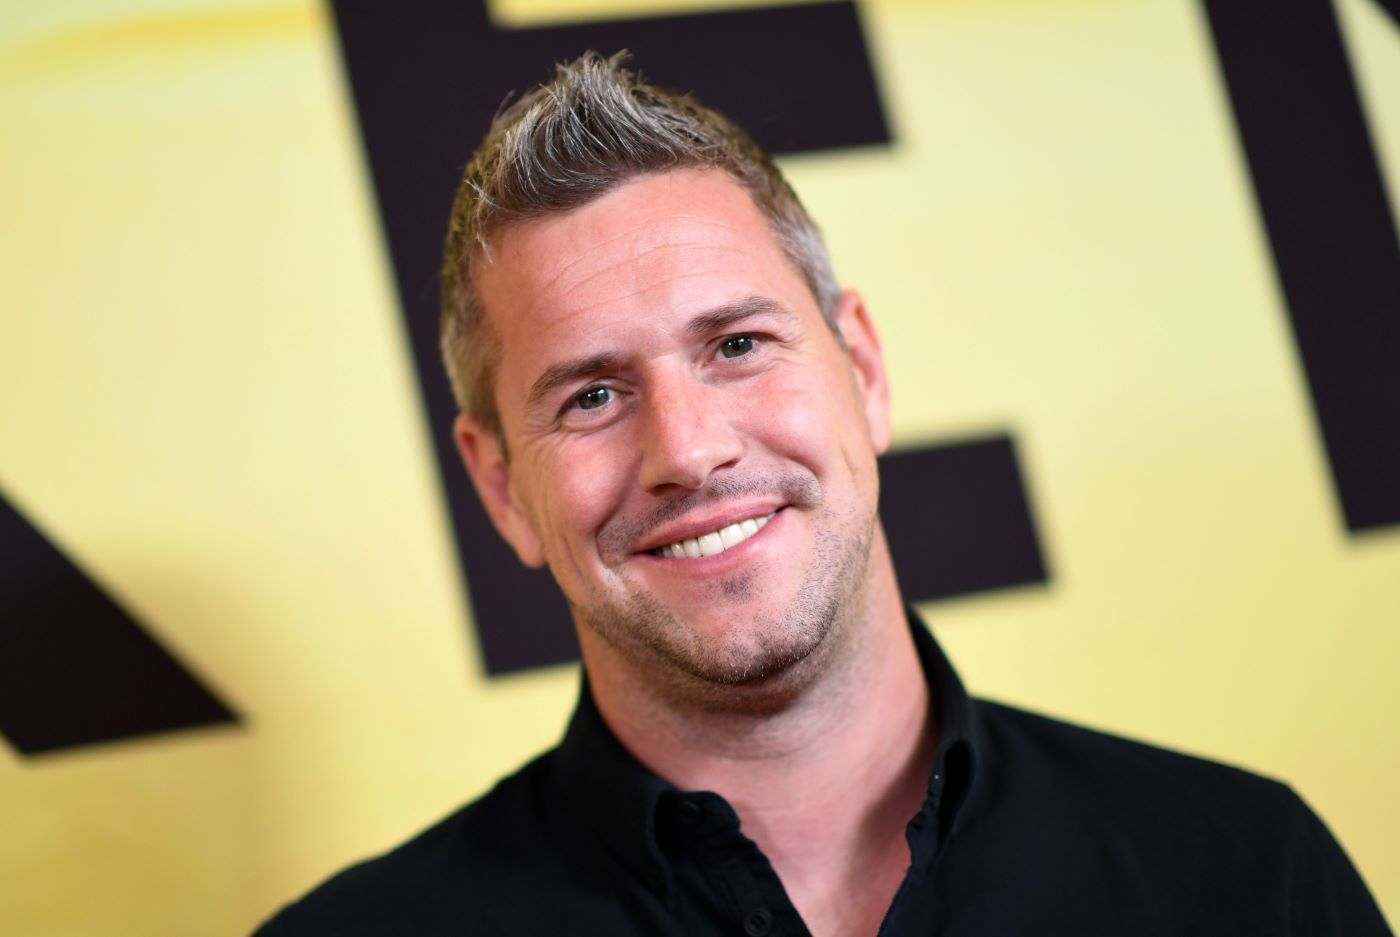 Ant Anstead wearing a black collared shirt in front of a yellow background with a black letter.